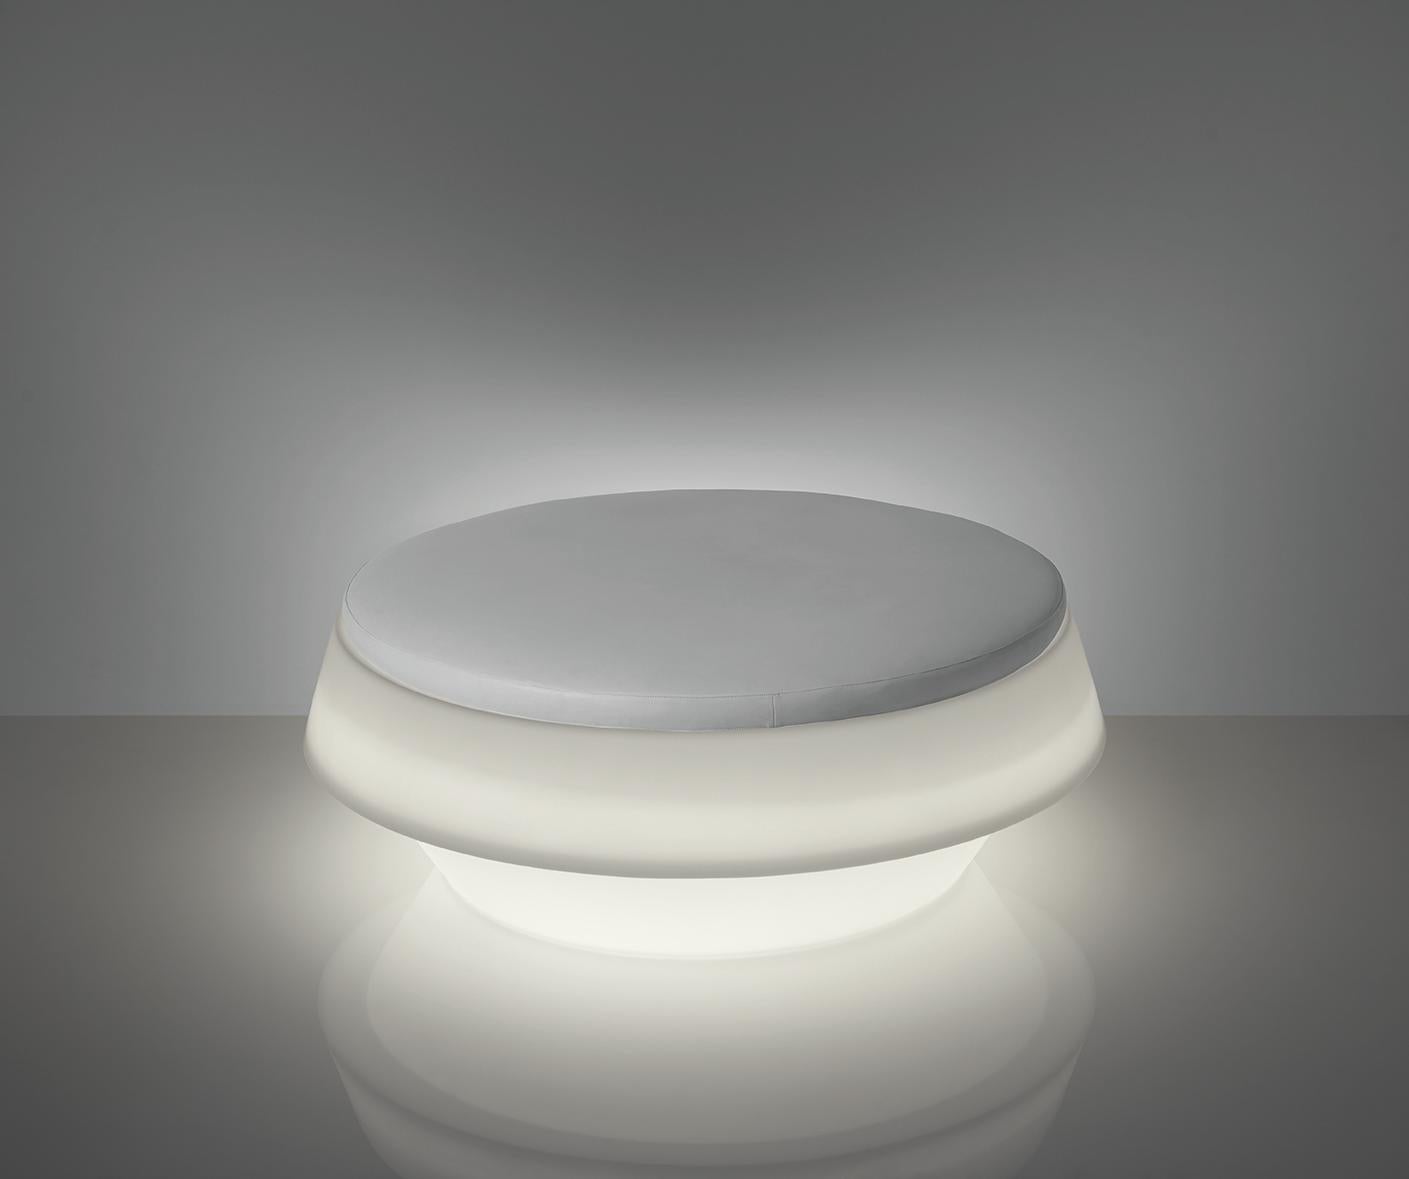 Lighted Giò Pouf by Giò Colonna Romano
Dimensions: Ø 145 x H 53 cm. Seat Height: 53 cm.
Materials: Polyethylene and eco-leather. 
Weight: 29 kg.

Extra shipping costs will occur due to the product volume. This product is suitable for indoor and